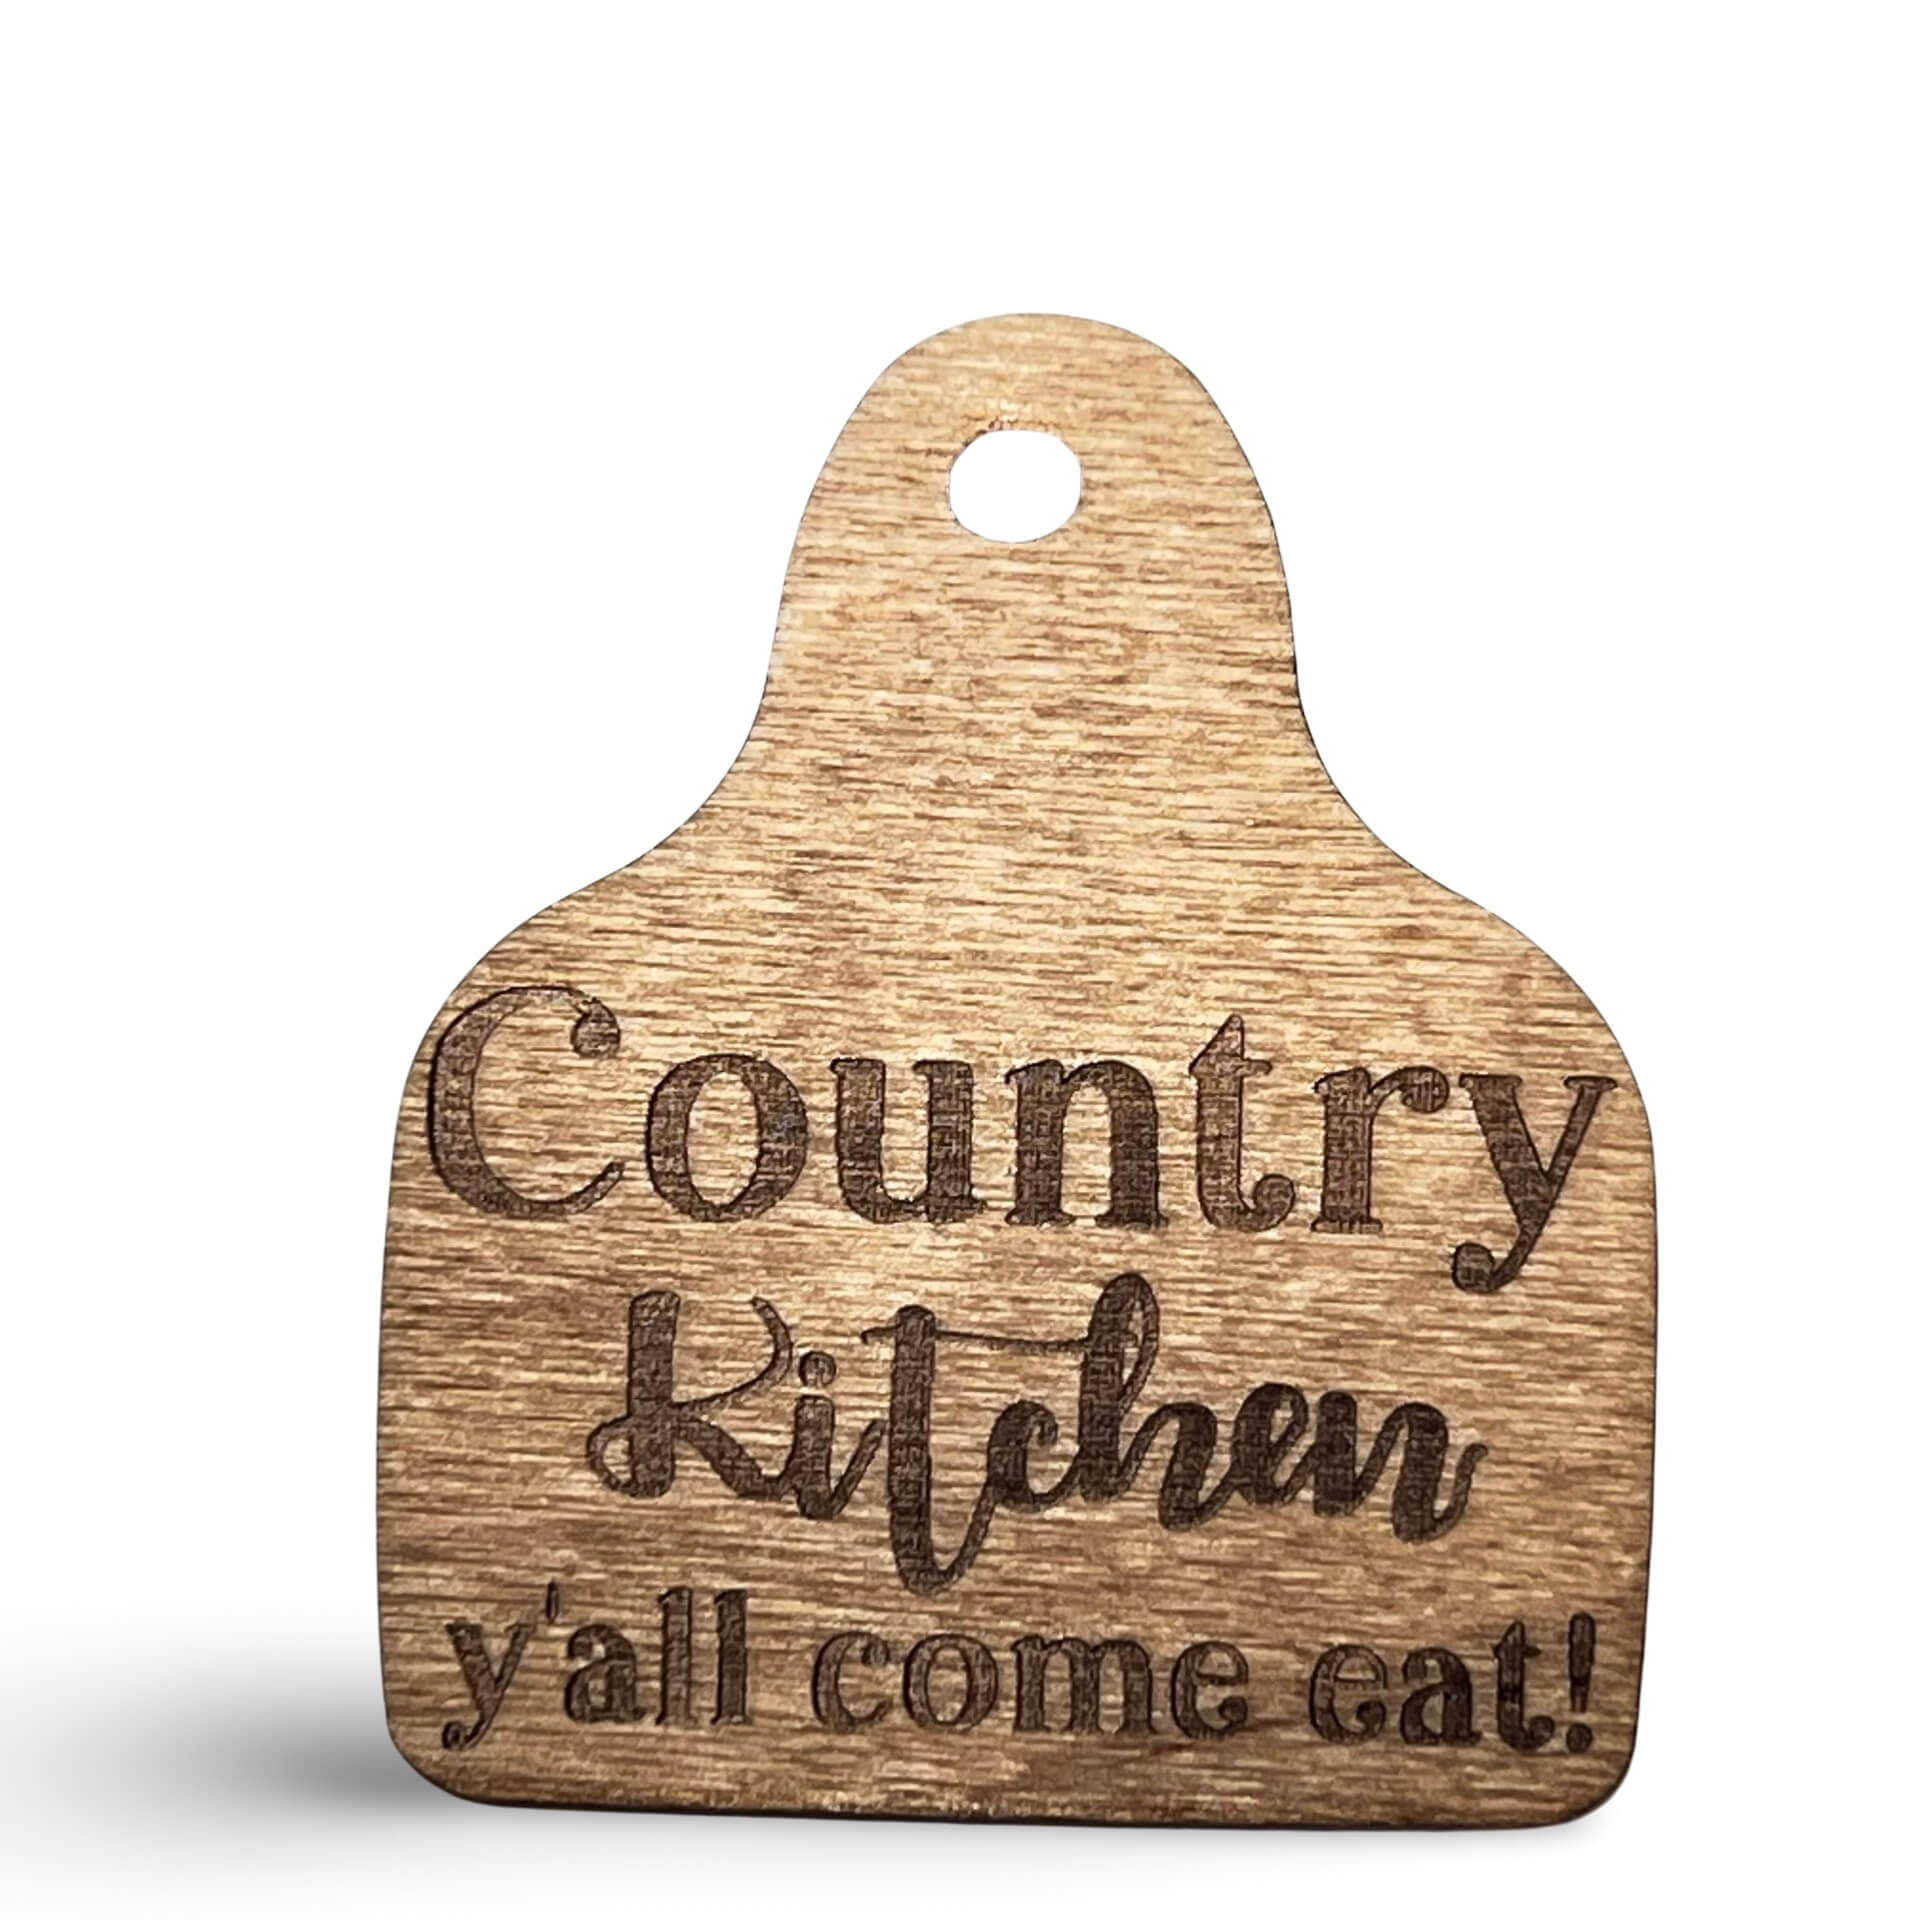 Country Kitchen Magnet